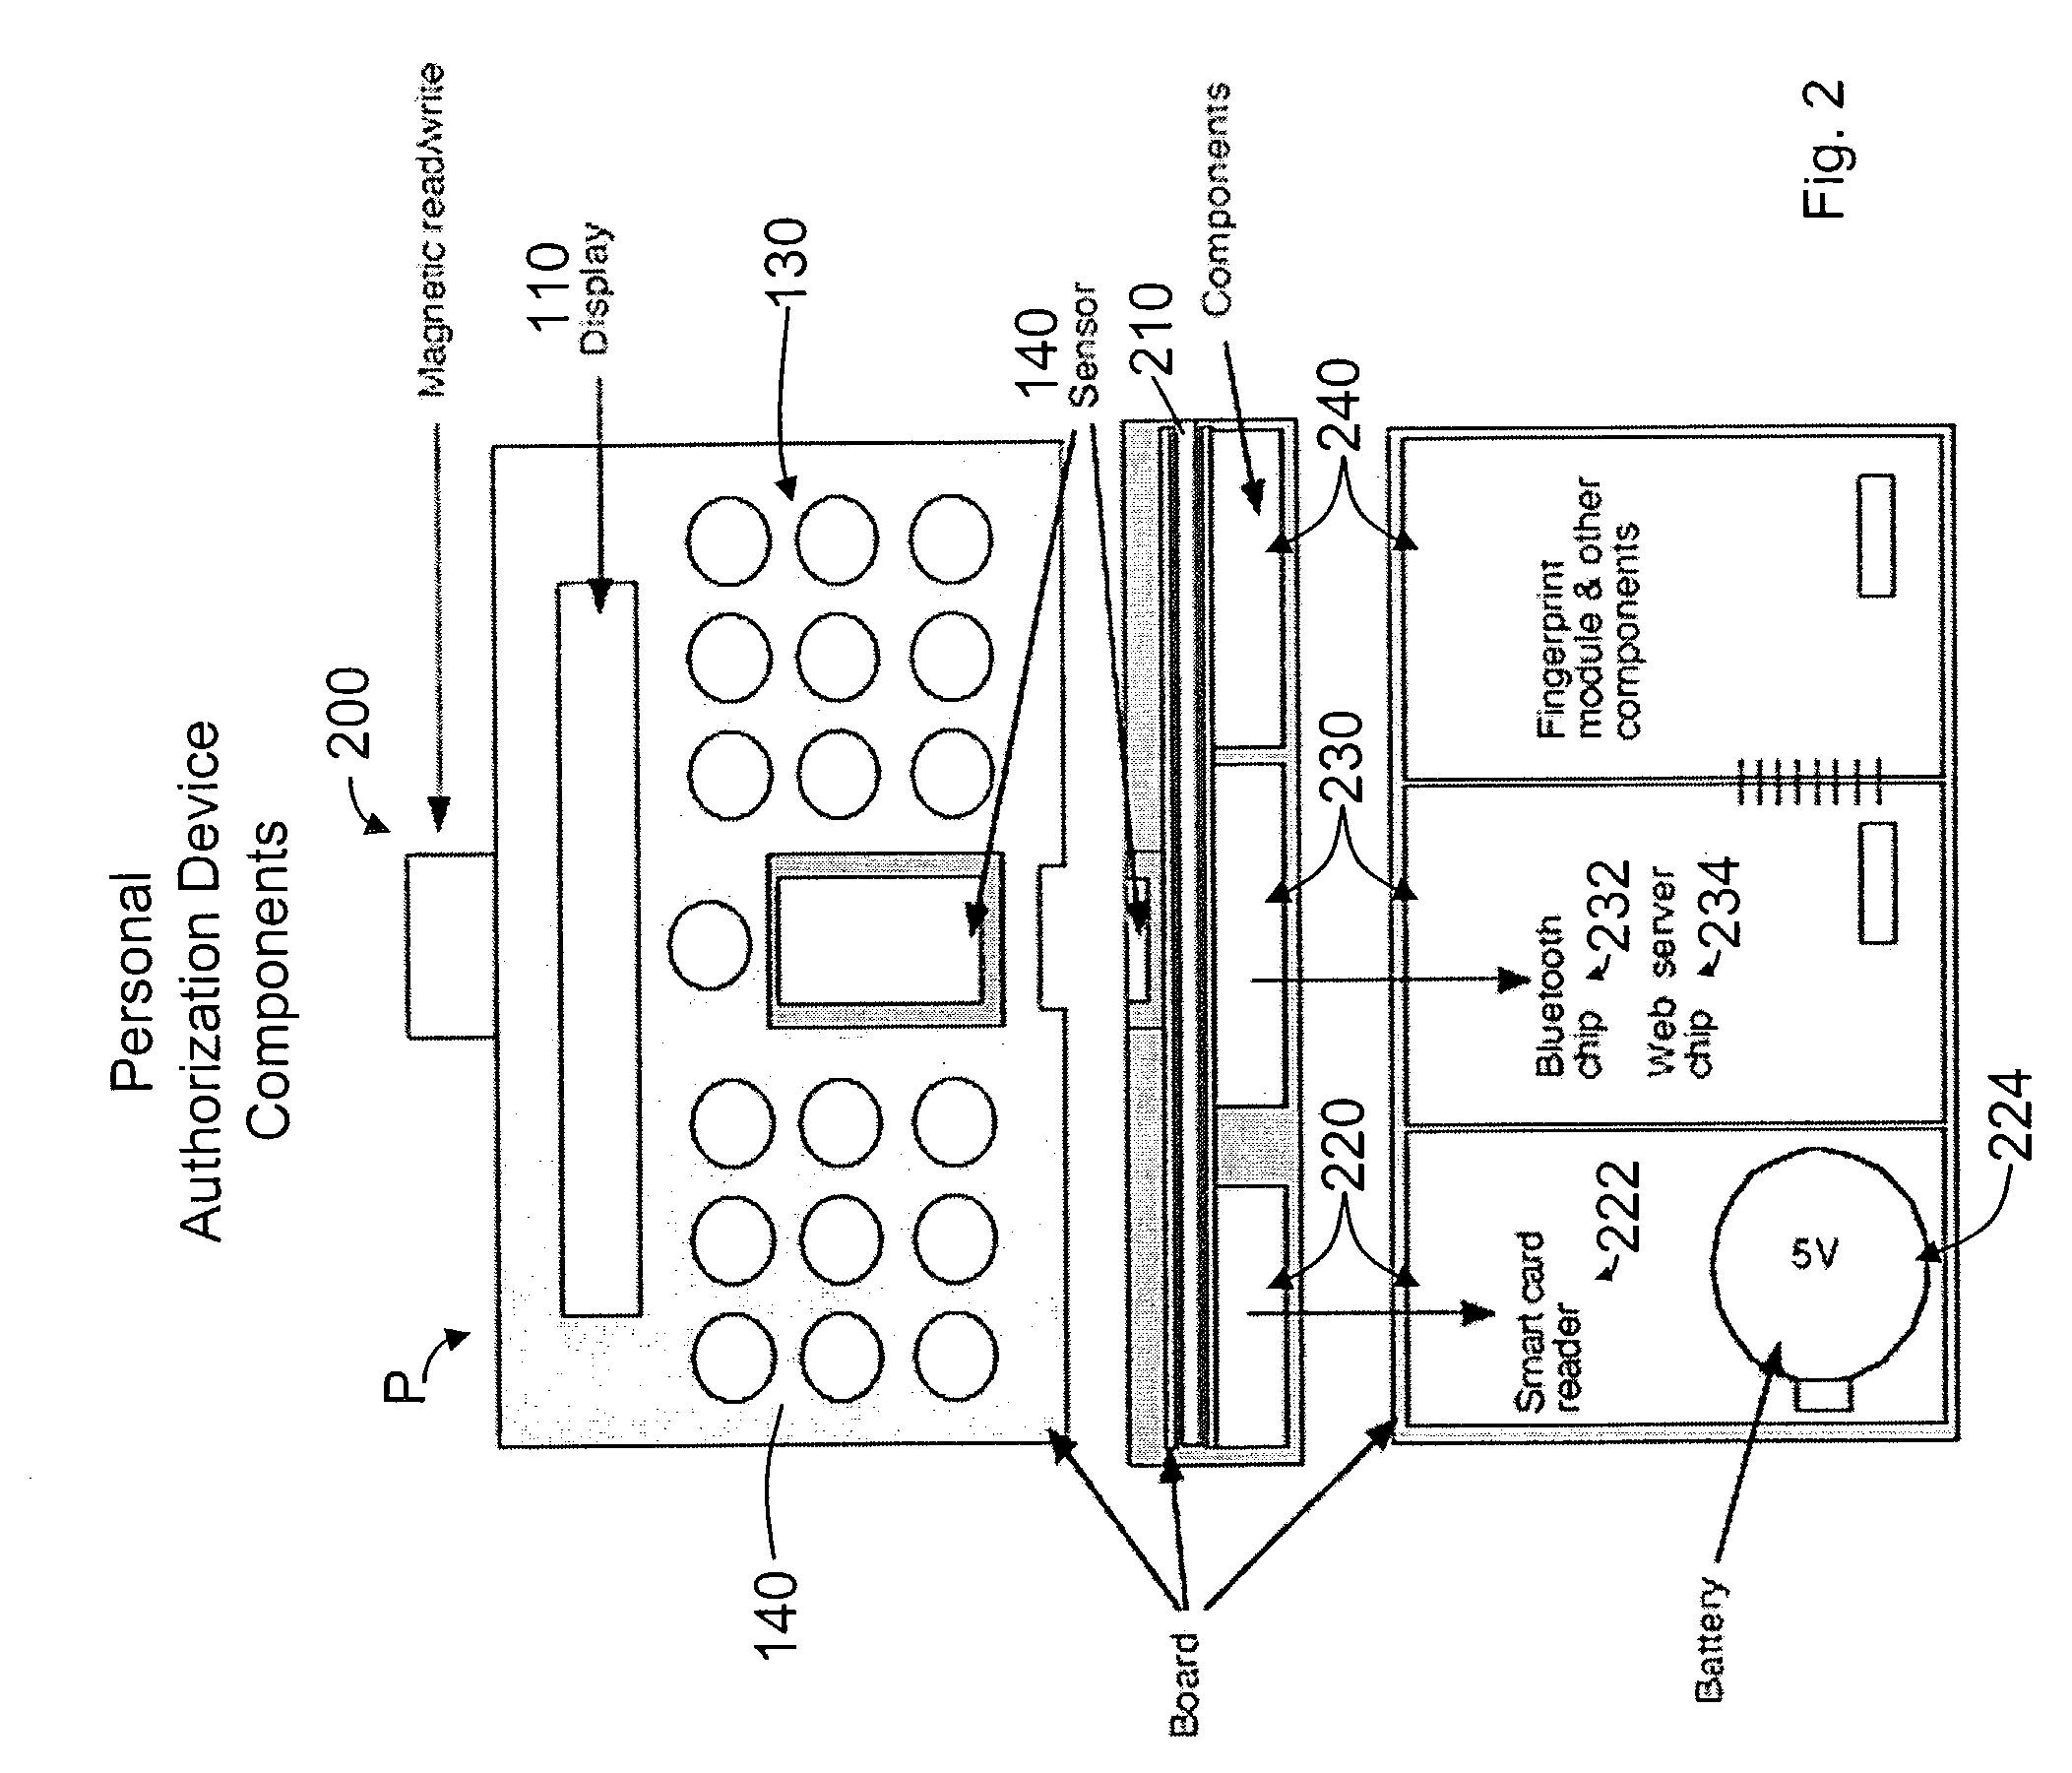 Personal biometric authentication and authorization device